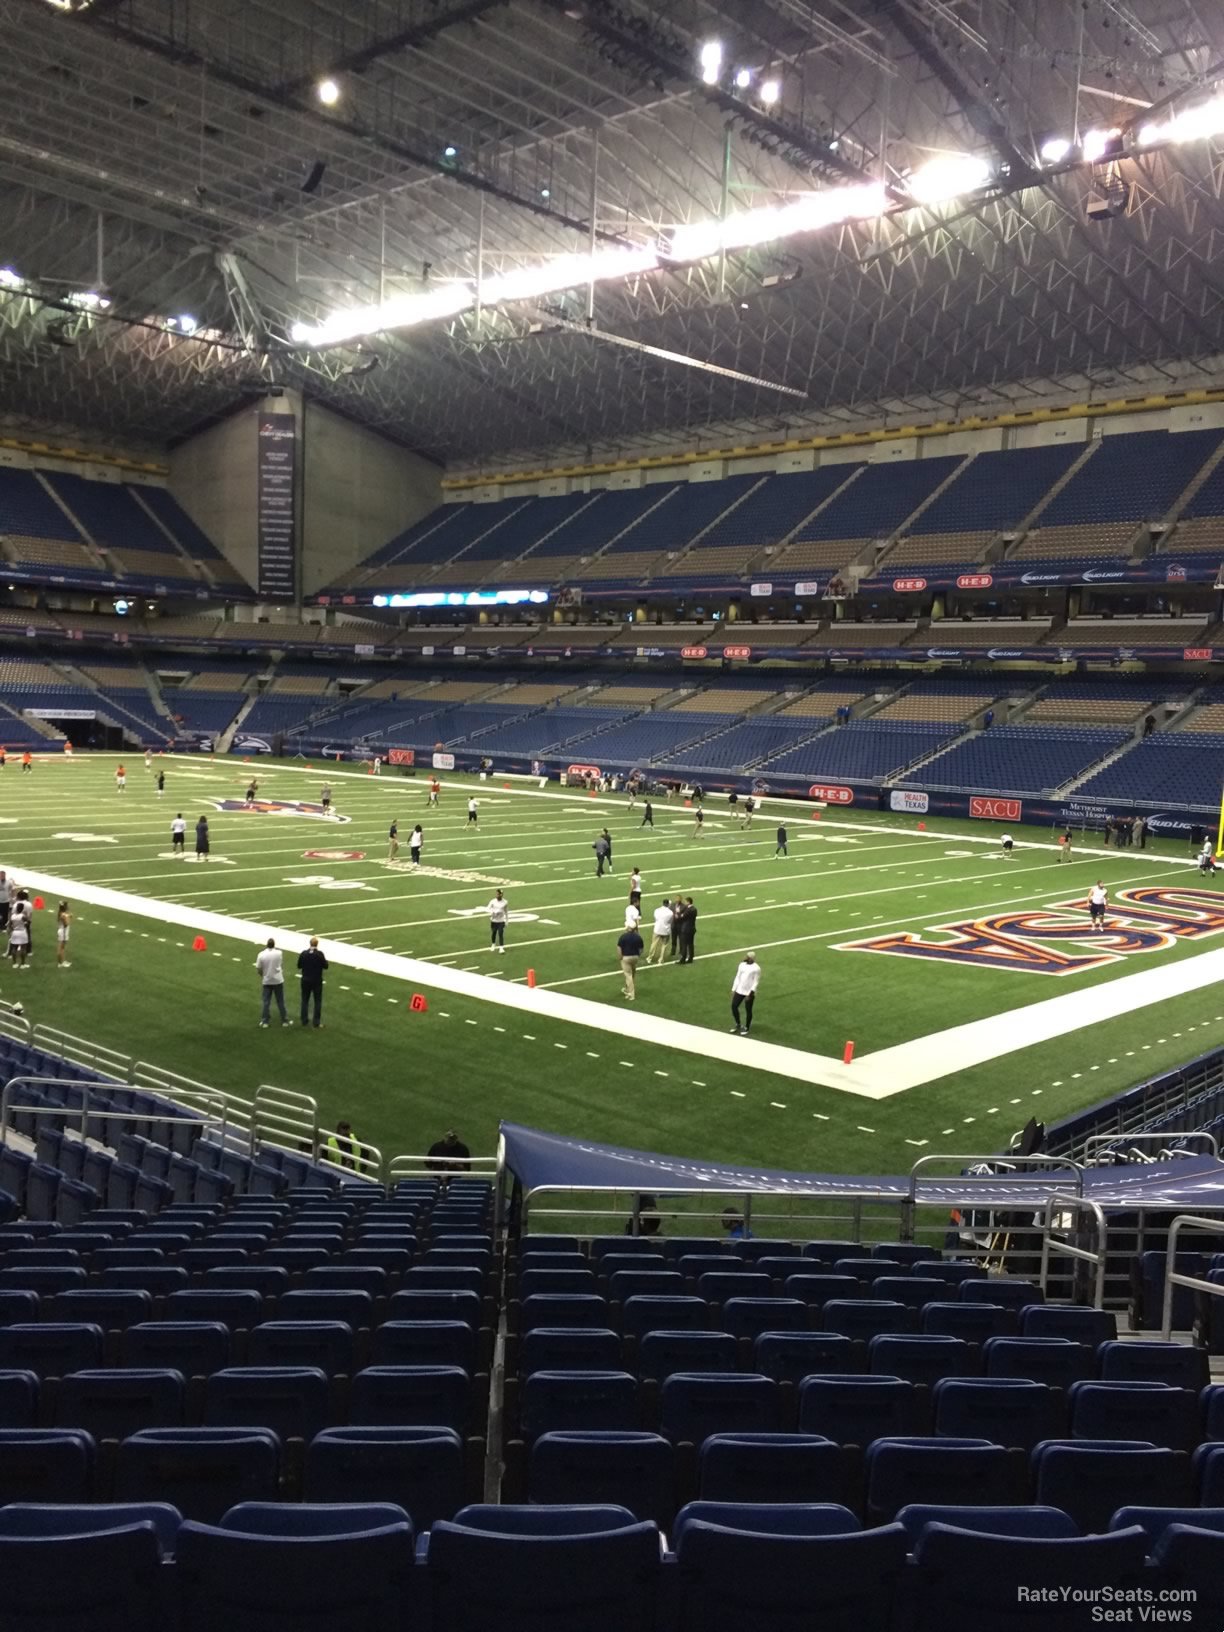 section 106, row 18 seat view  for football - alamodome